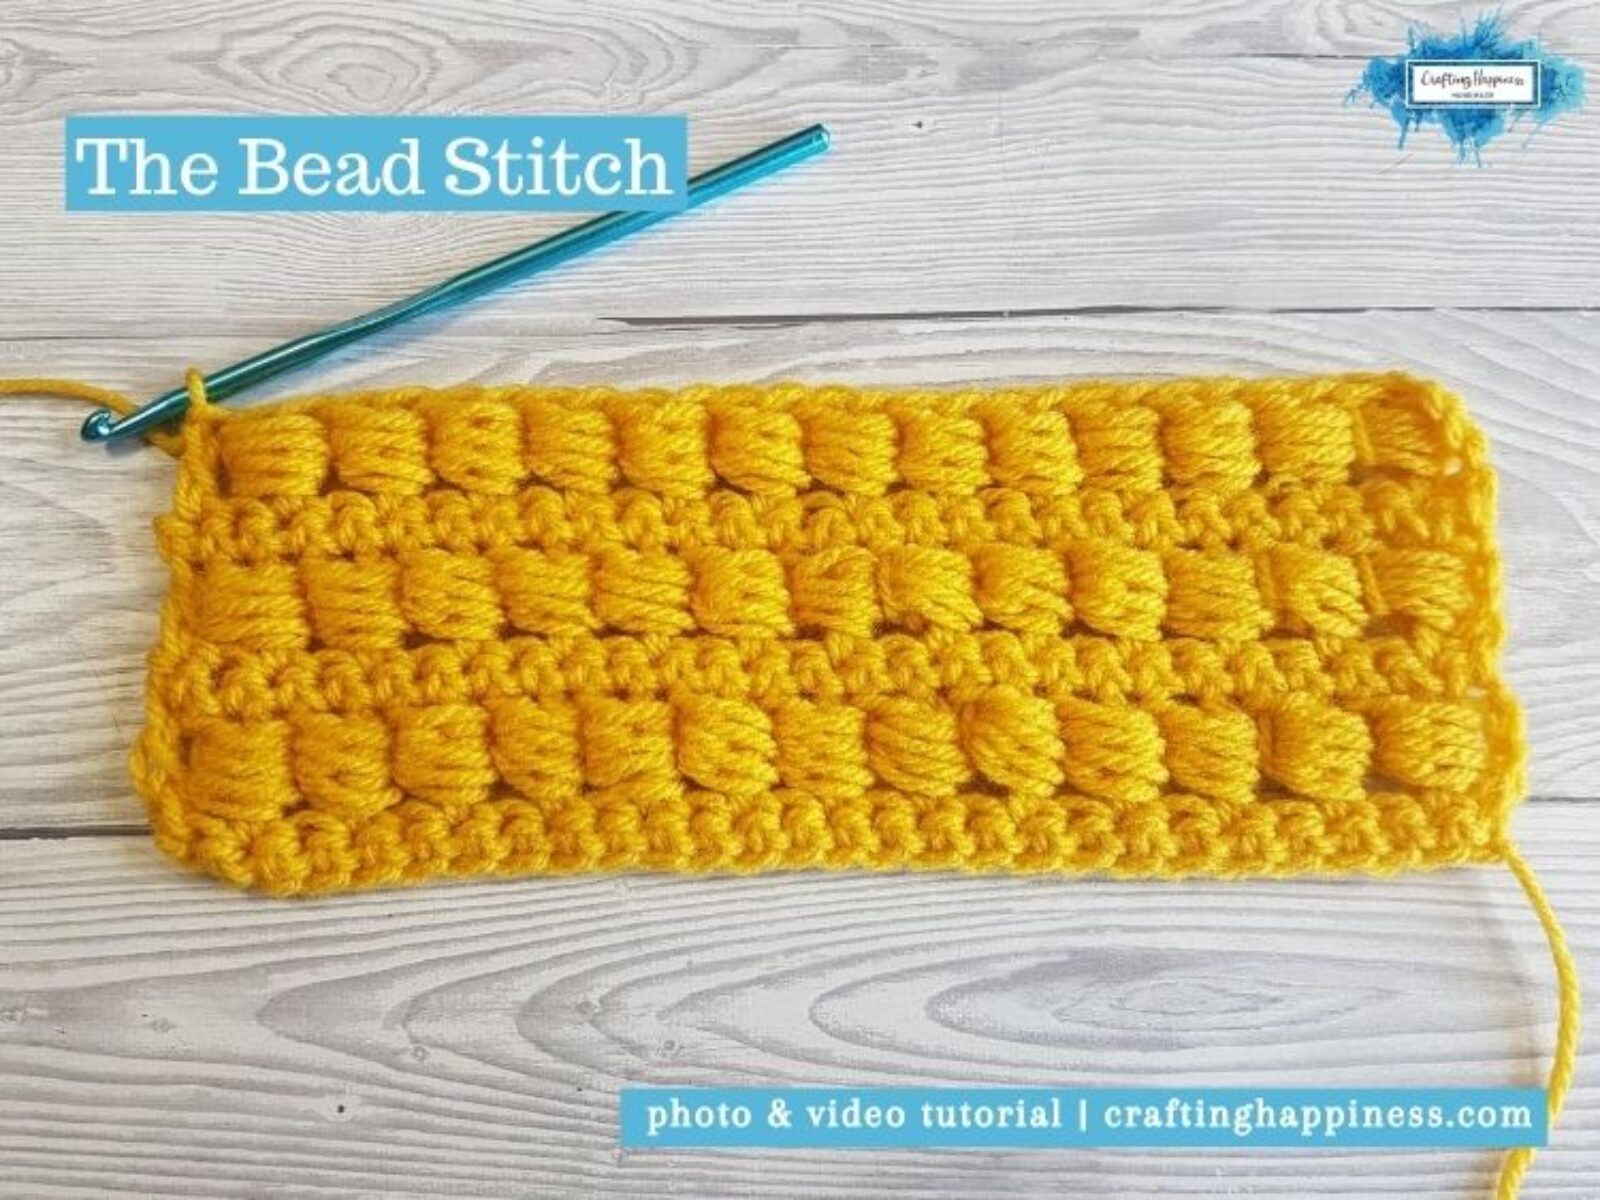 how to crochet the bead stitch (tutorial + video)